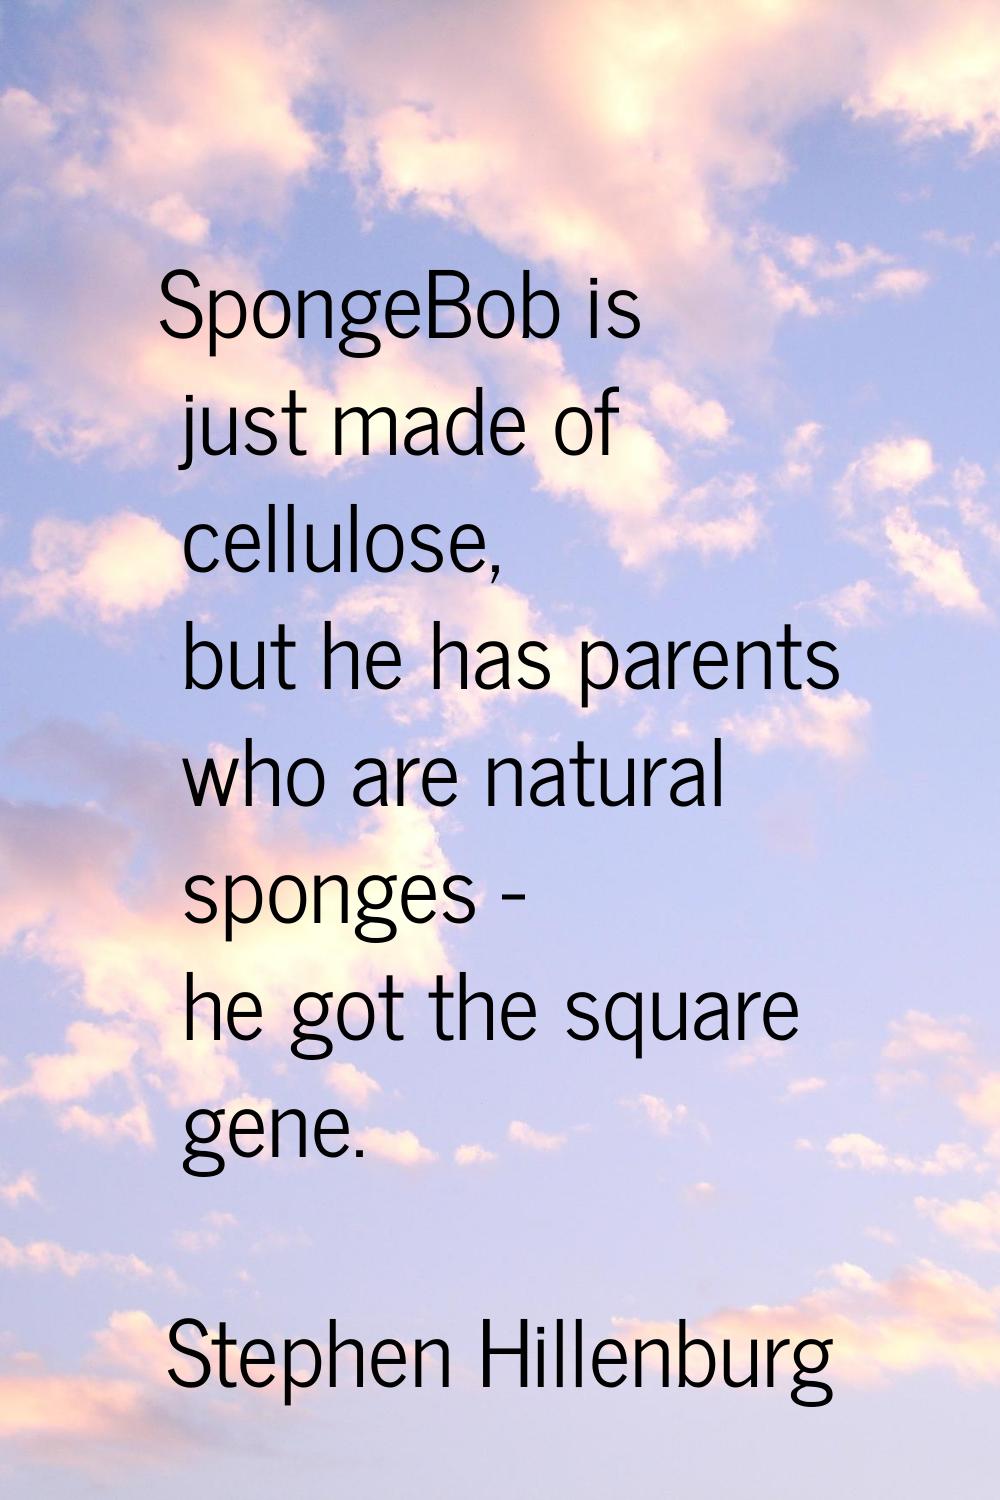 SpongeBob is just made of cellulose, but he has parents who are natural sponges - he got the square